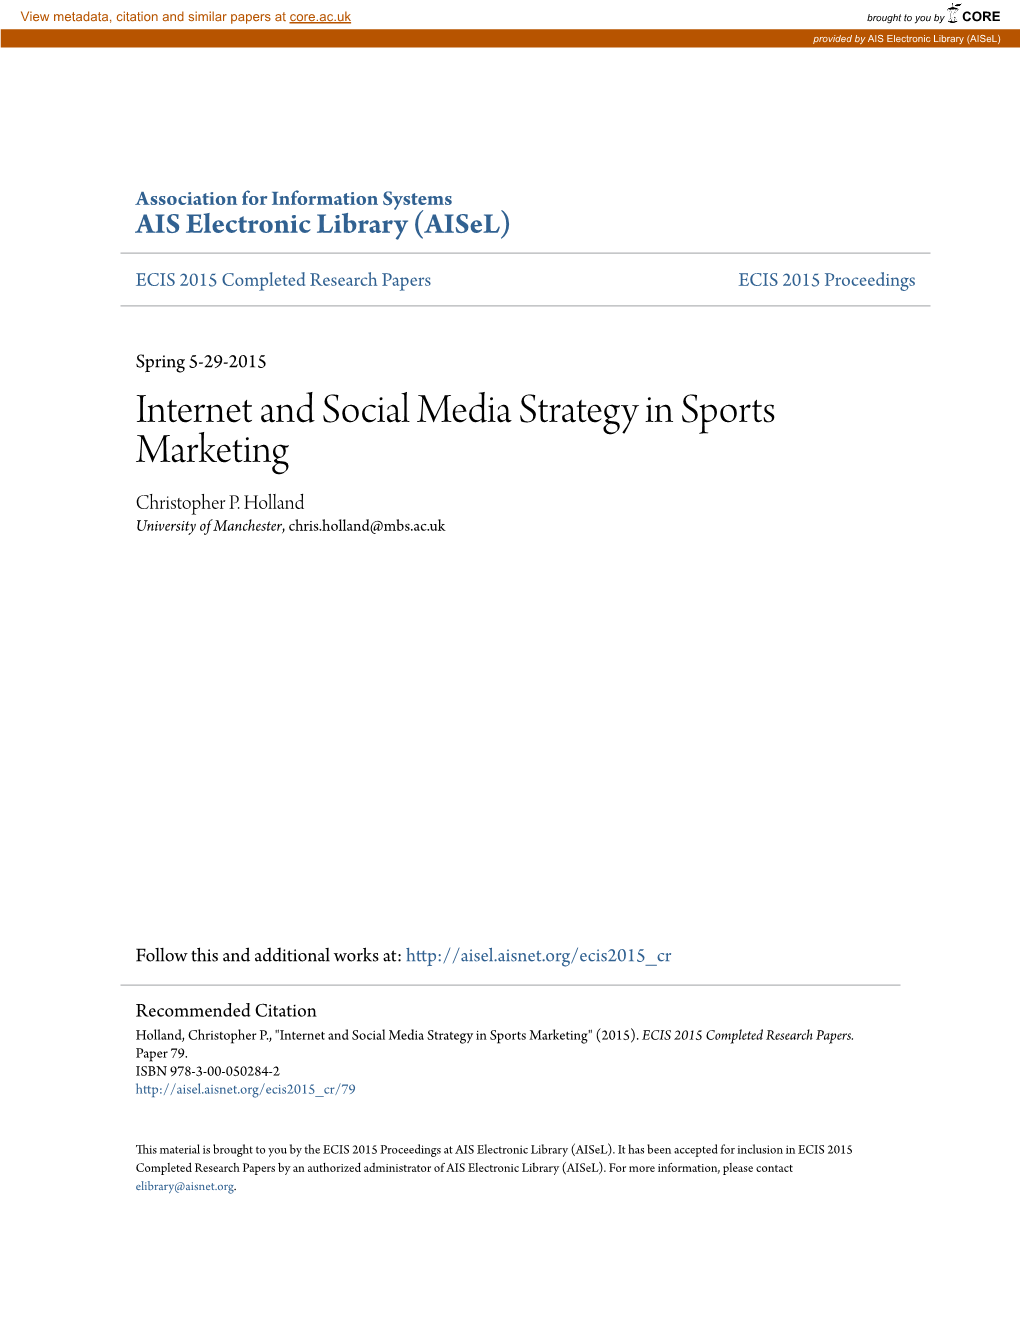 Internet and Social Media Strategy in Sports Marketing Christopher P